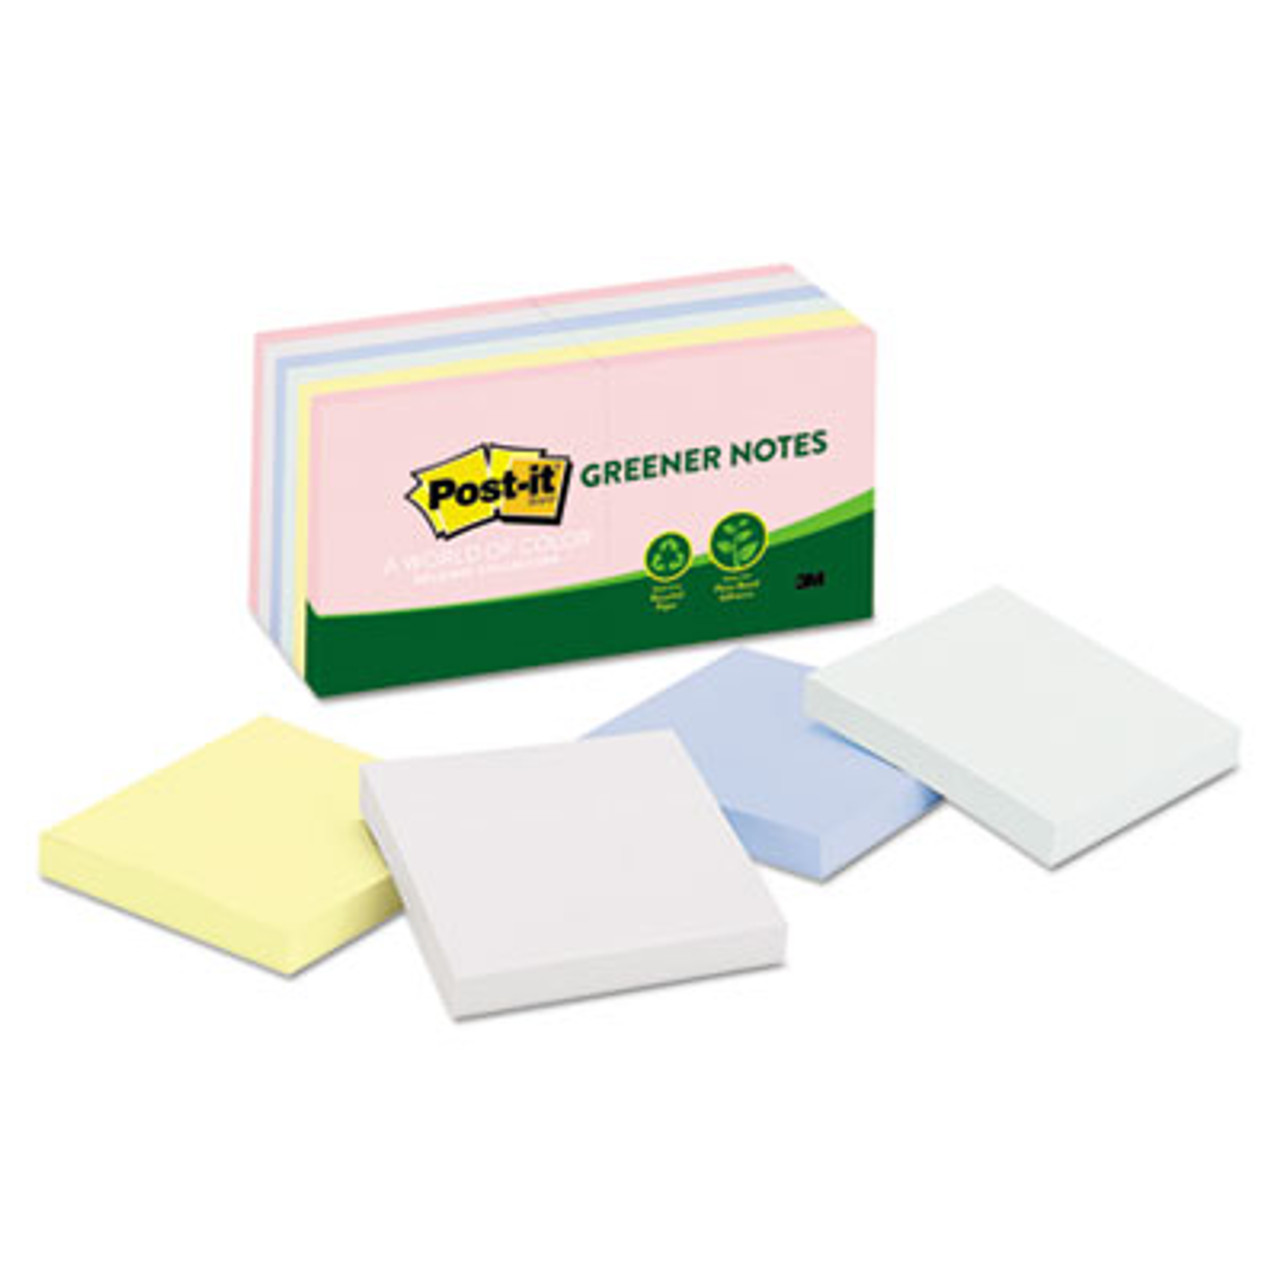 Original Recycled Note Pads, 3 x 3, Helsinki, 100/Pad, 12 Pads/Pack